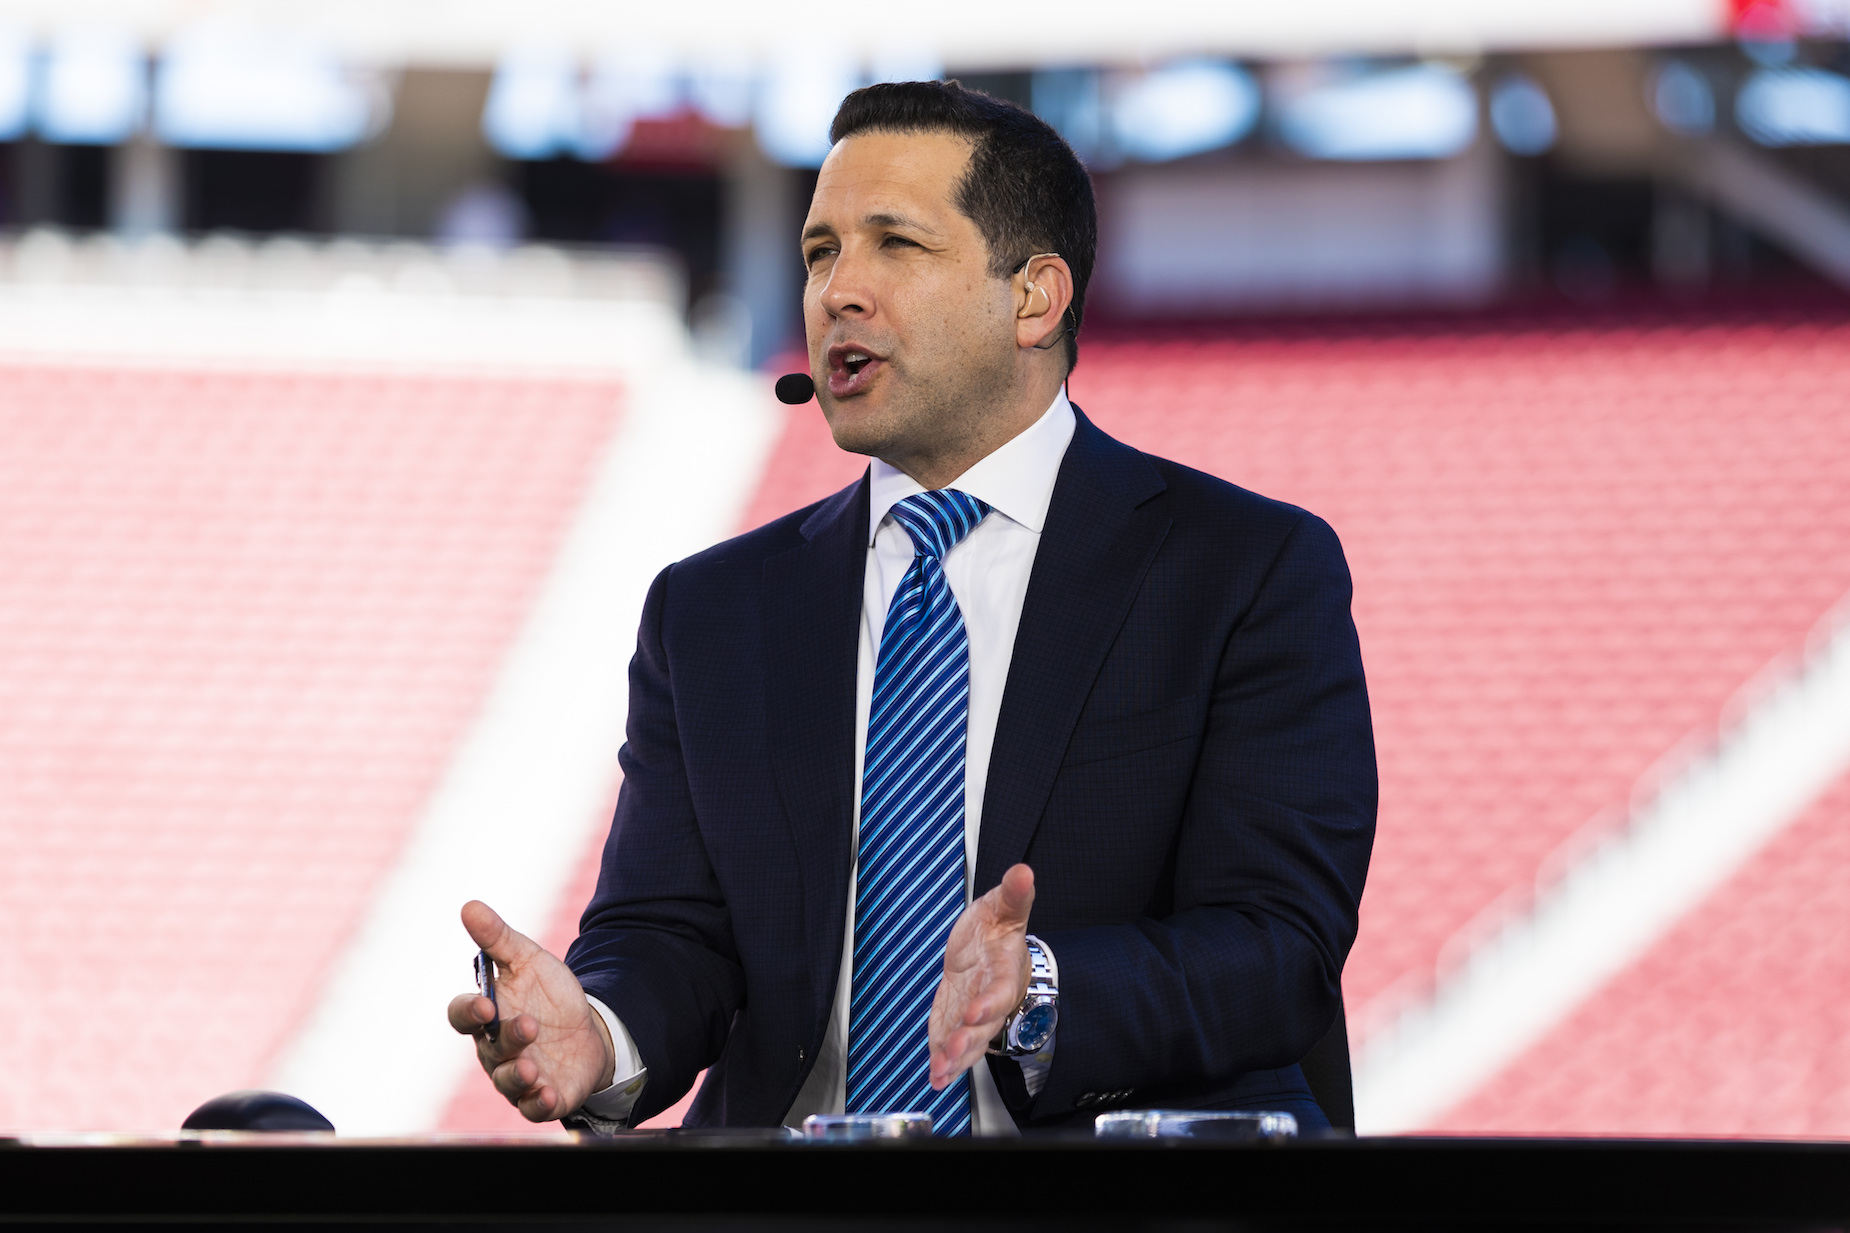 While ESPN's Adam Schefter is a well-respected NFL insider, his recent tweets may have tarnished that reputation.